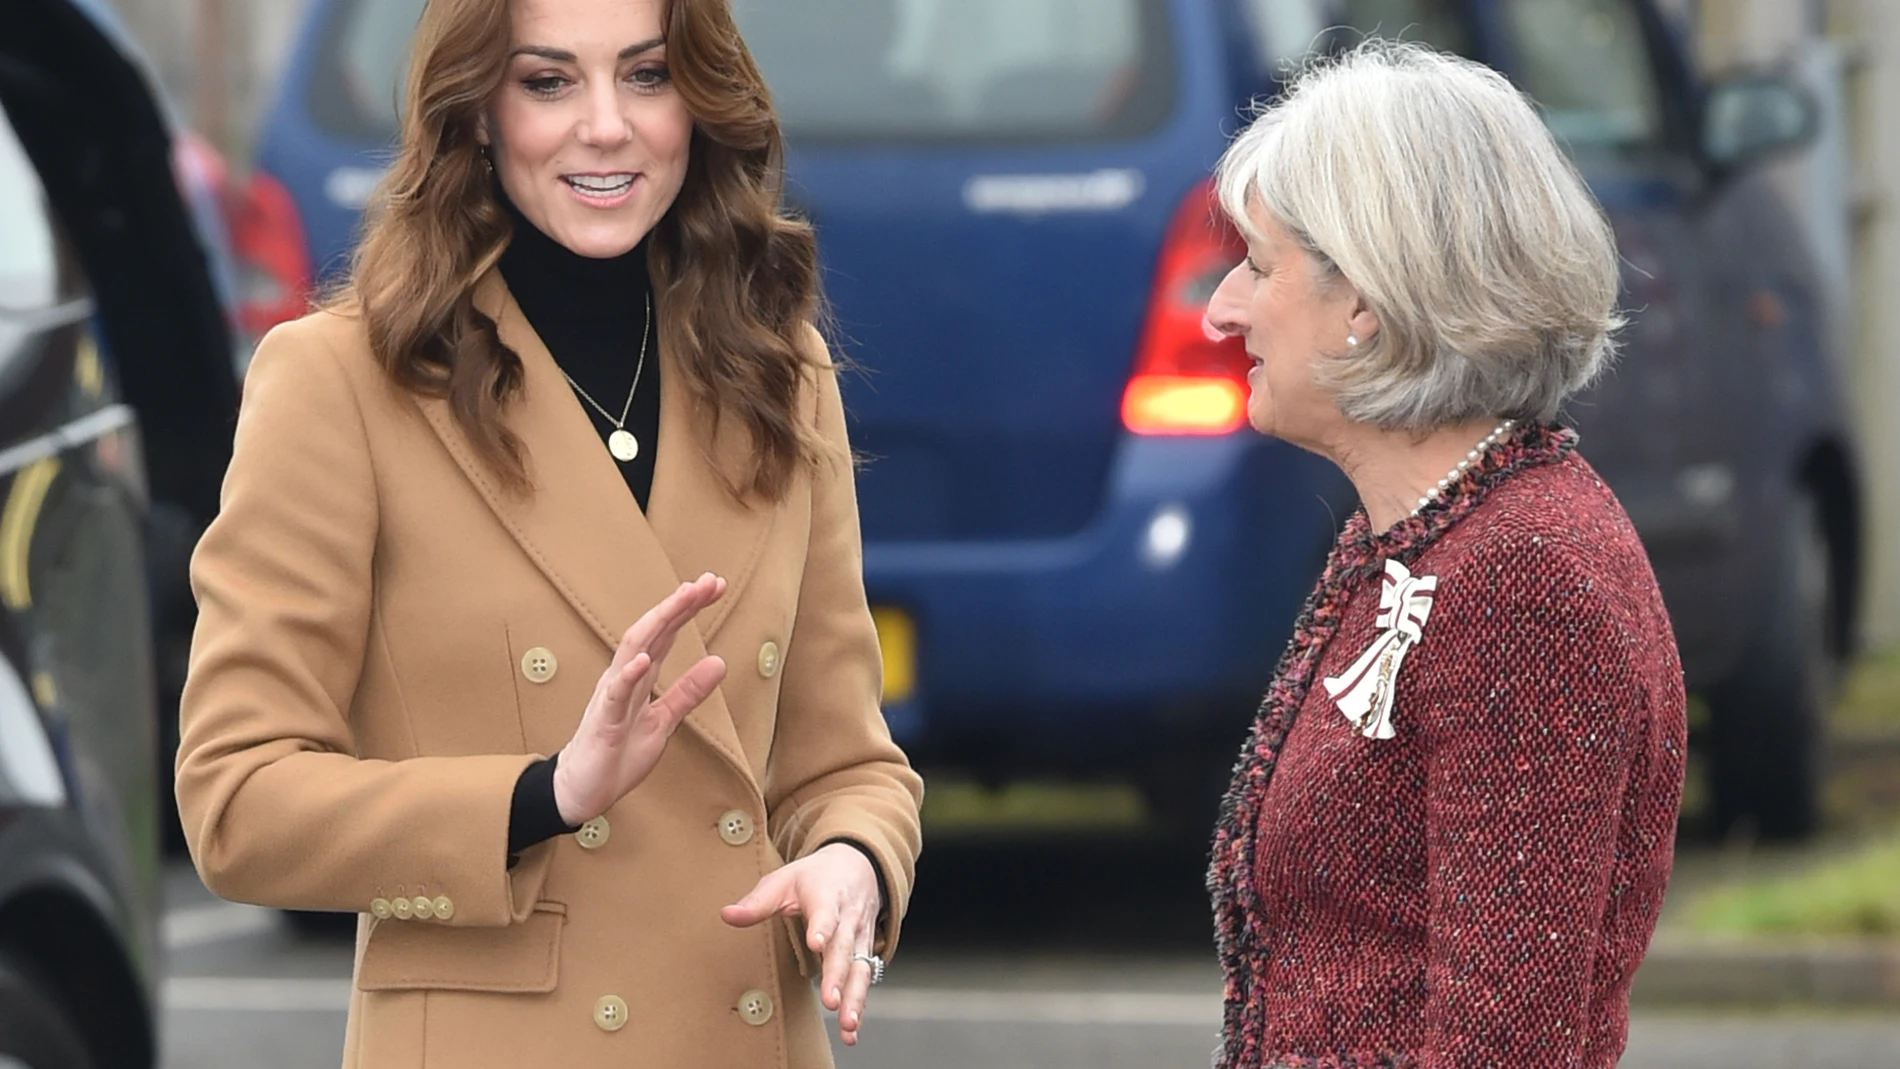 The Duchess of Cambridge arrives for a visit to Ely & Caerau Children's Centre in Cardiff. *** Local Caption *** .